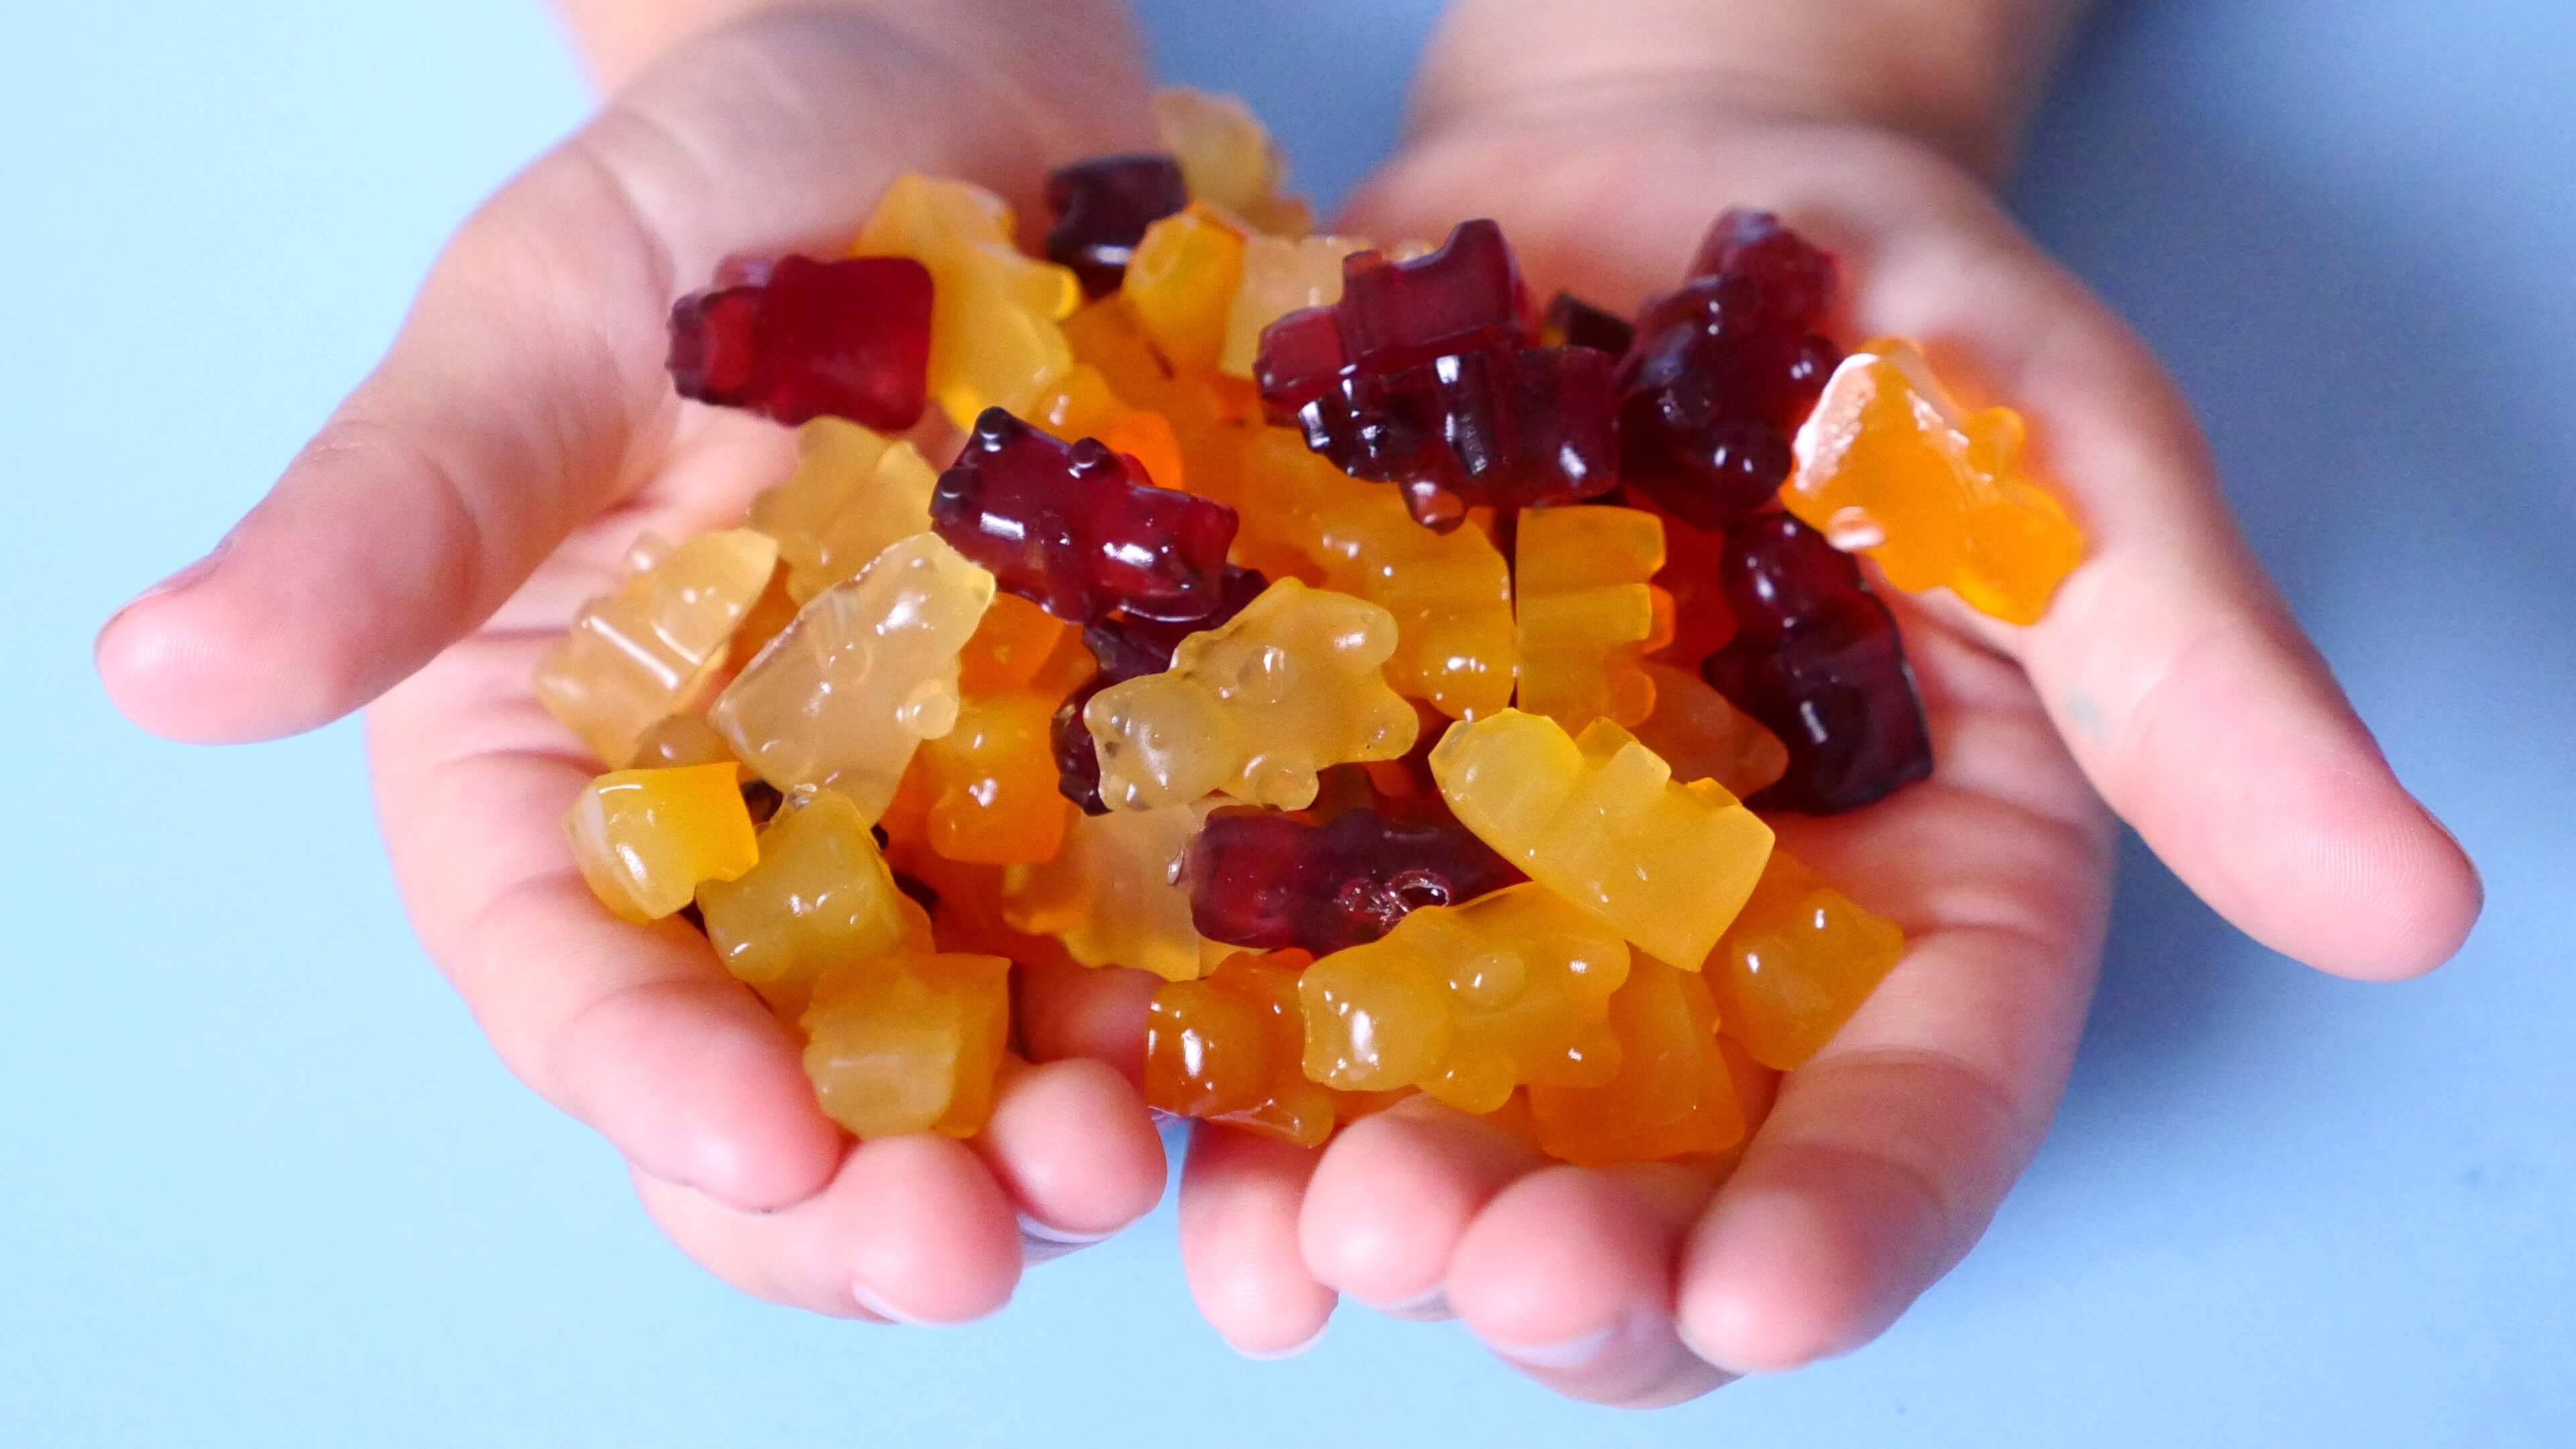 https://www.mamanatural.com/wp-content/uploads/Healthy-Gummy-Bear-Recipe-using-fruit-and-honey-by-Mama-Natural.jpg